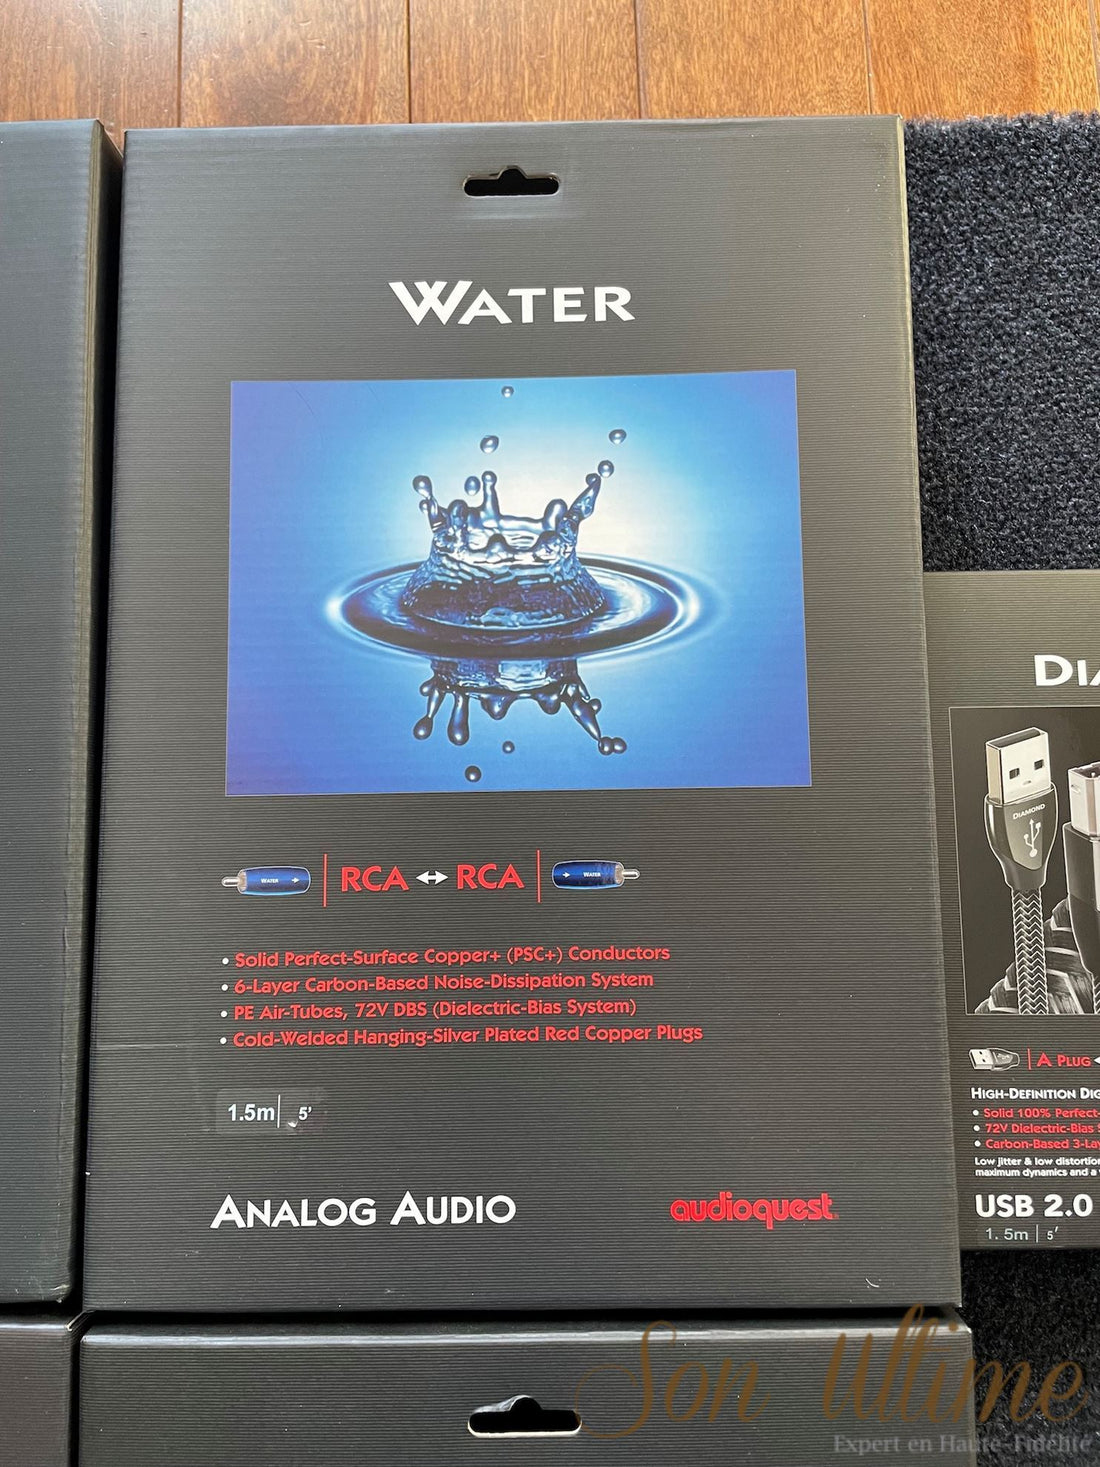 Water RCA 1.5M (Used Sold)